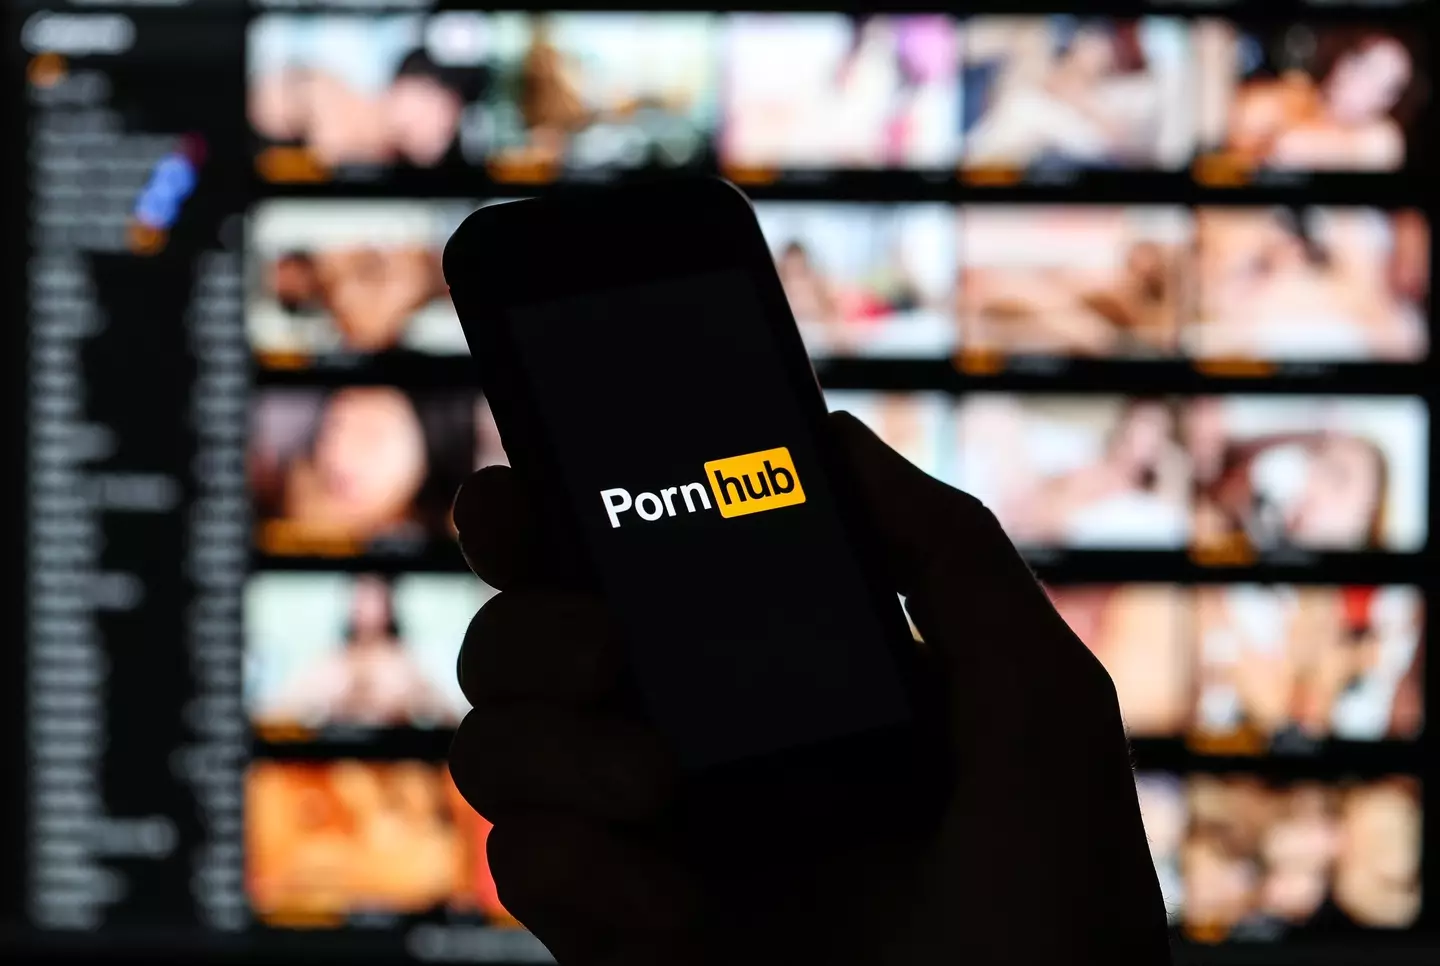 PornHub has been embroiled in scandal over the past year.